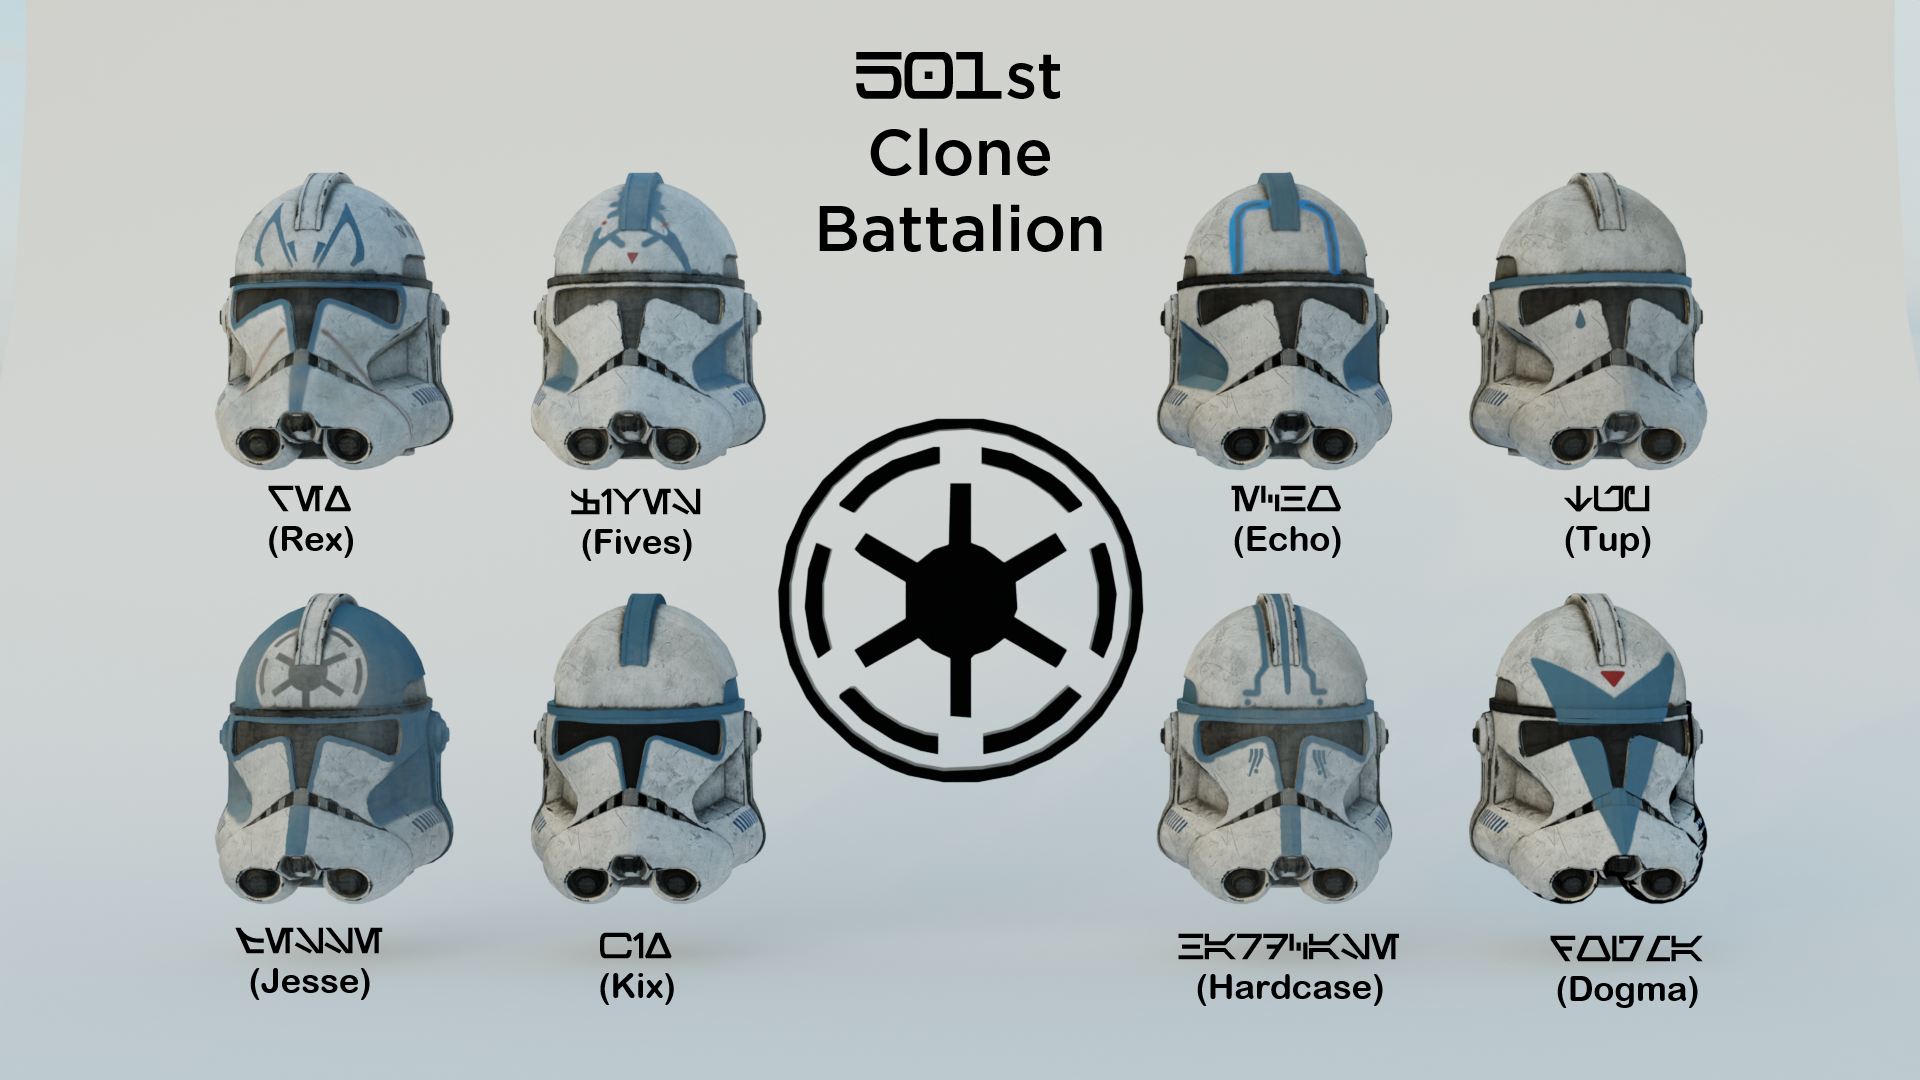 I textured some 501st helmets to practice using Substance Painter